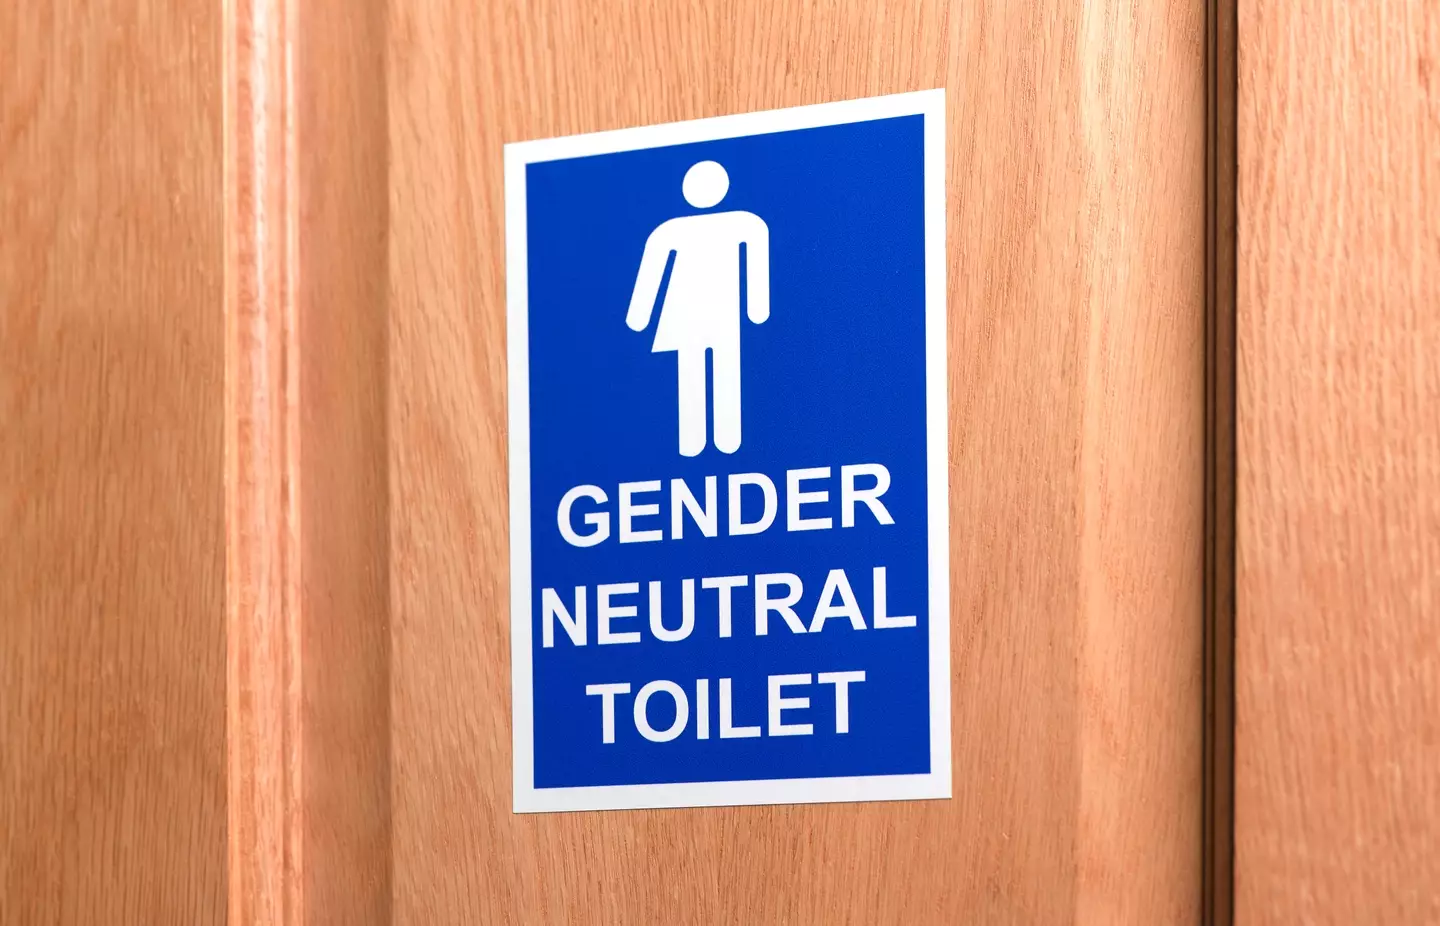 Changes are coming to gender-neutral toilets.